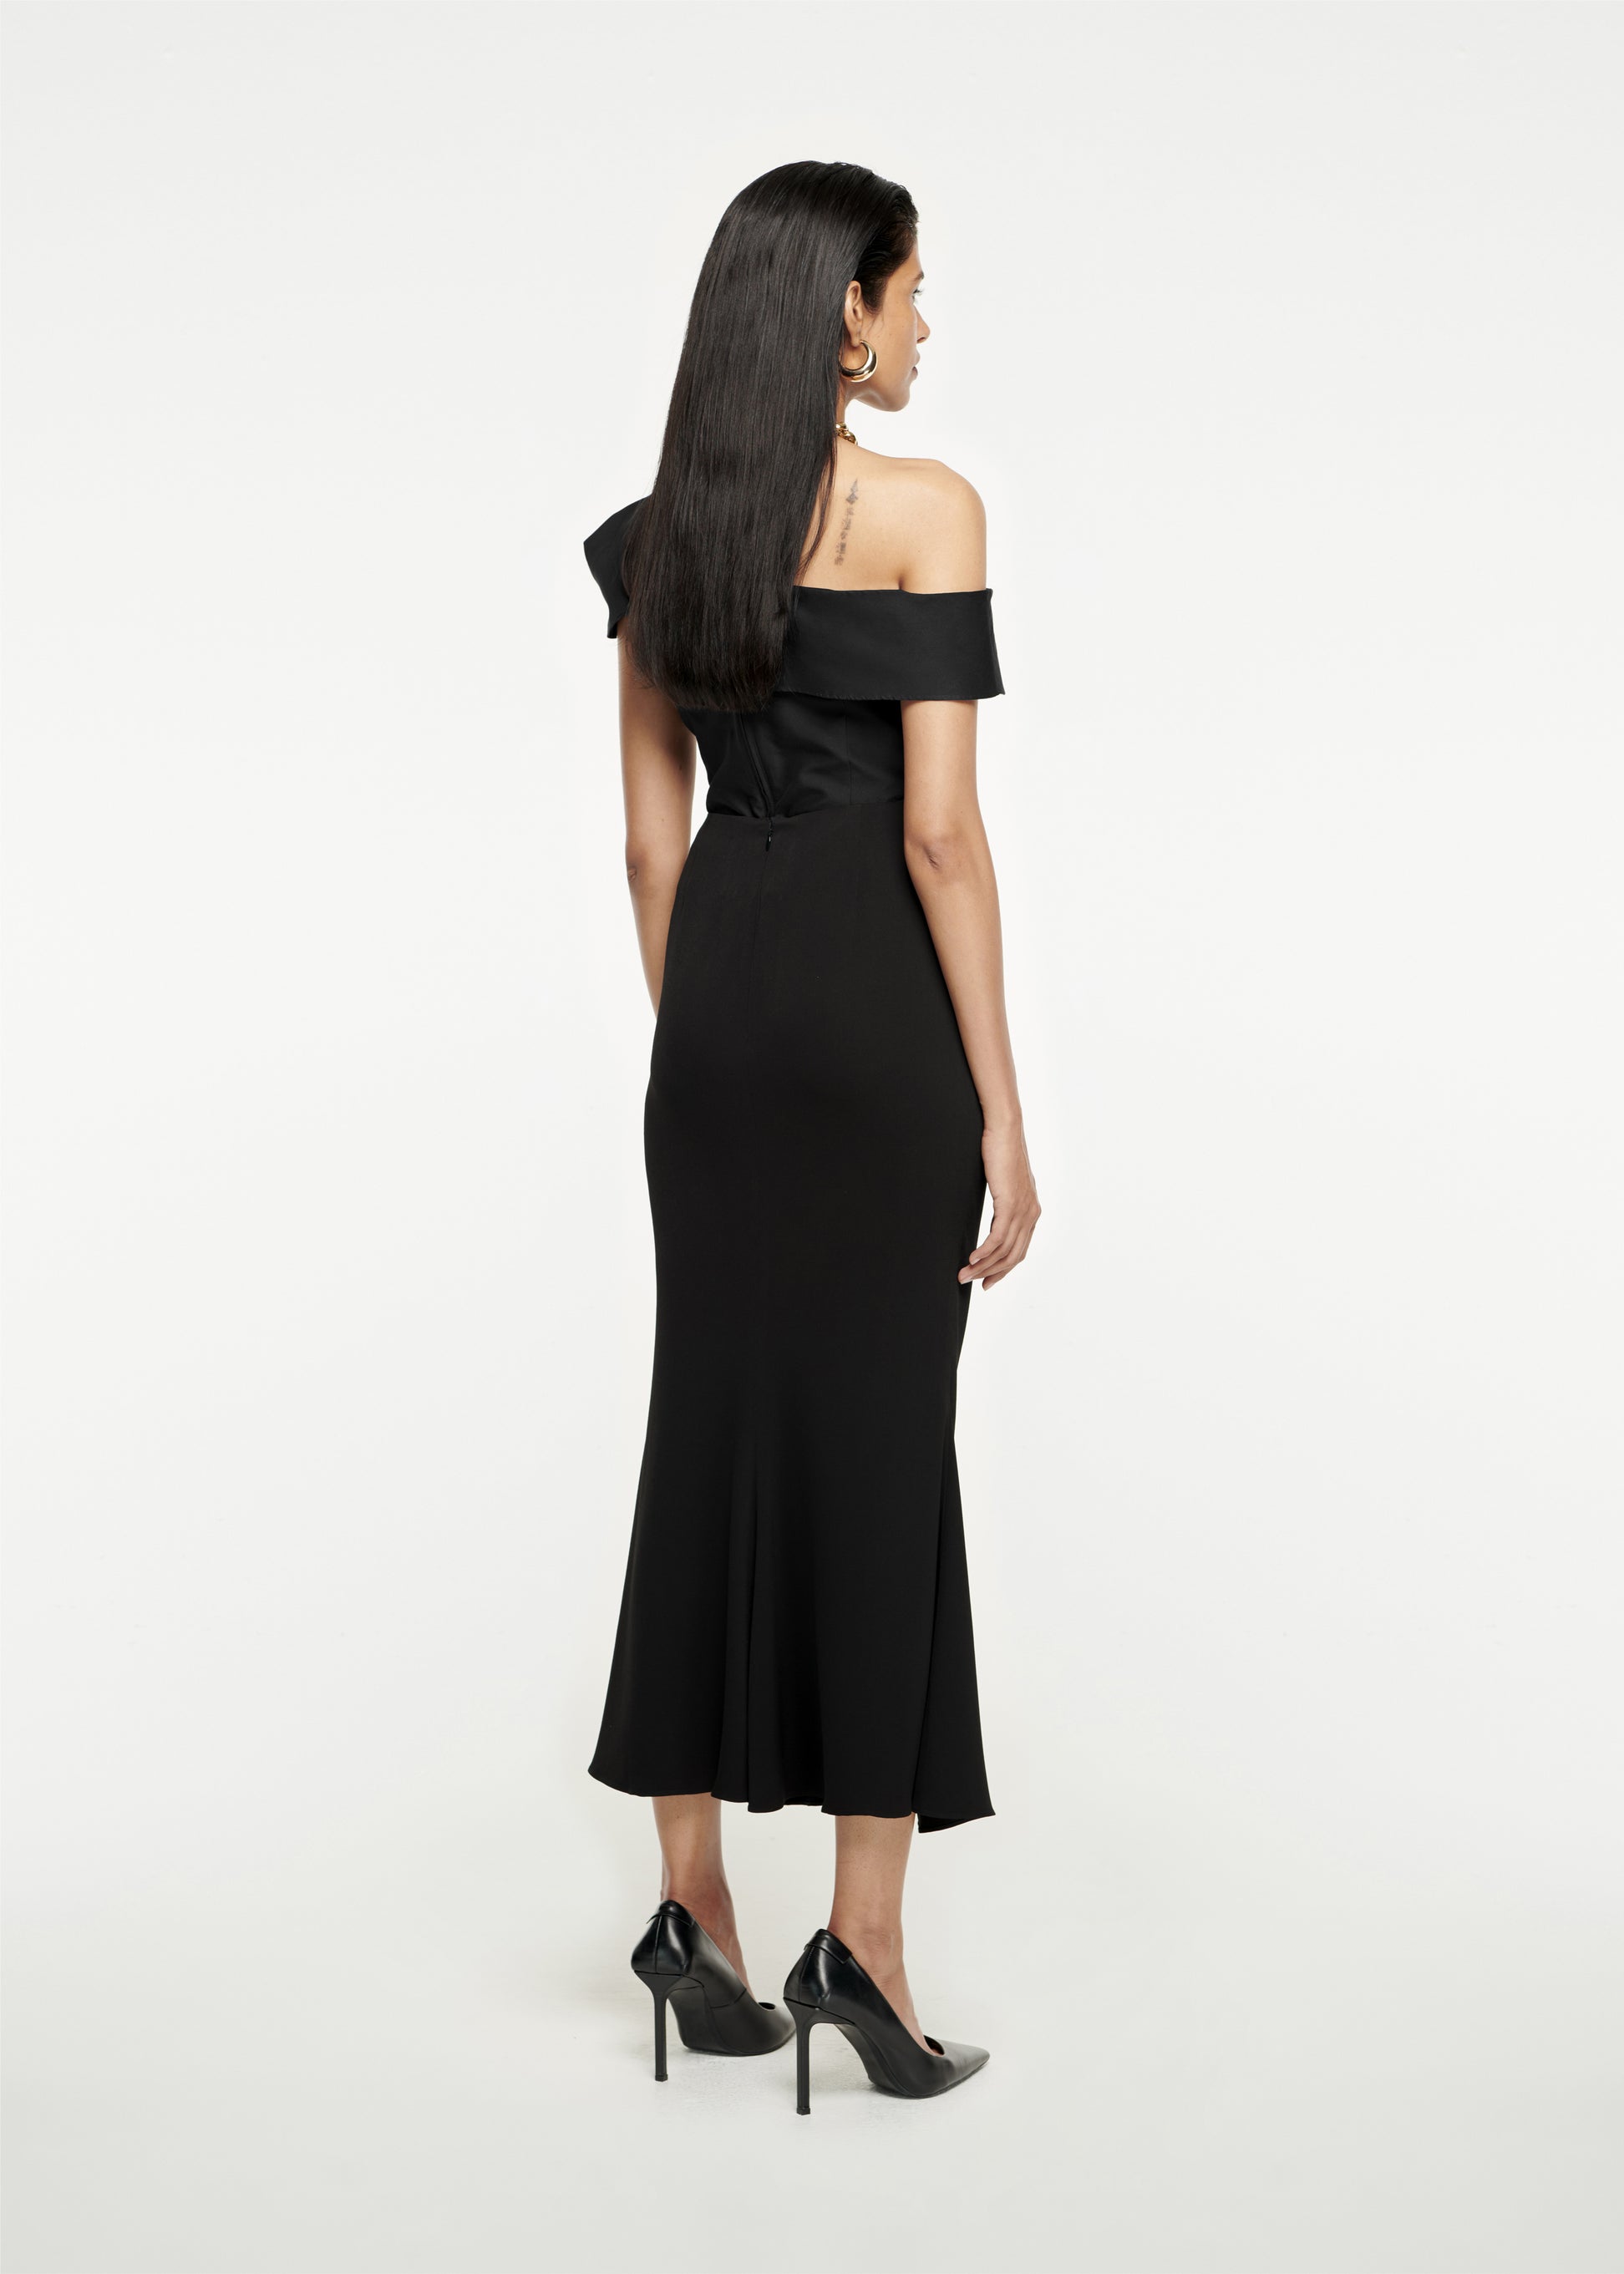 The back of a woman wearing the Asymmetric Stretch-Cady Top in Black